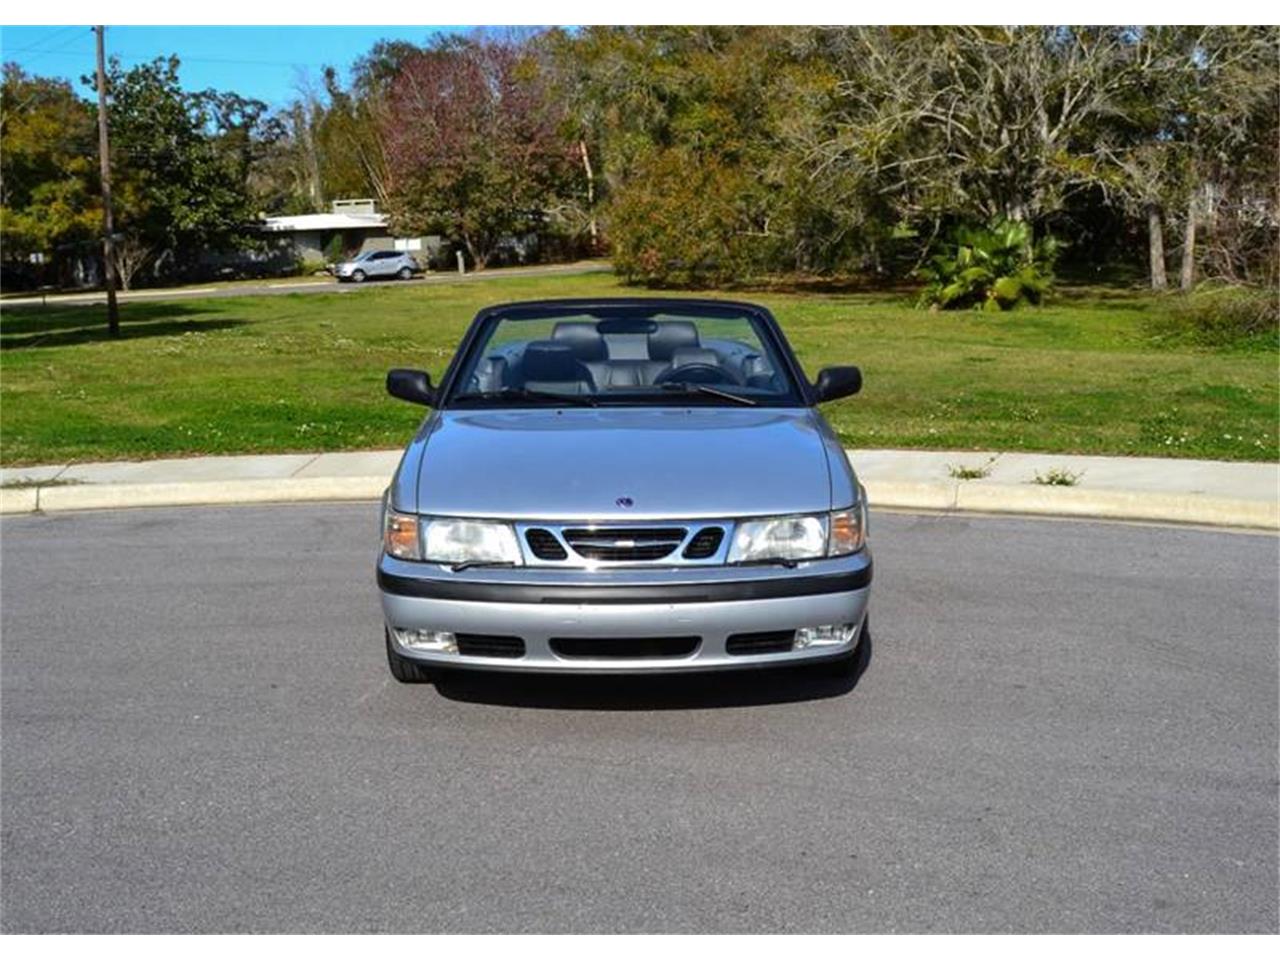 2000 Saab 9-3 for sale in Clearwater, FL – photo 11